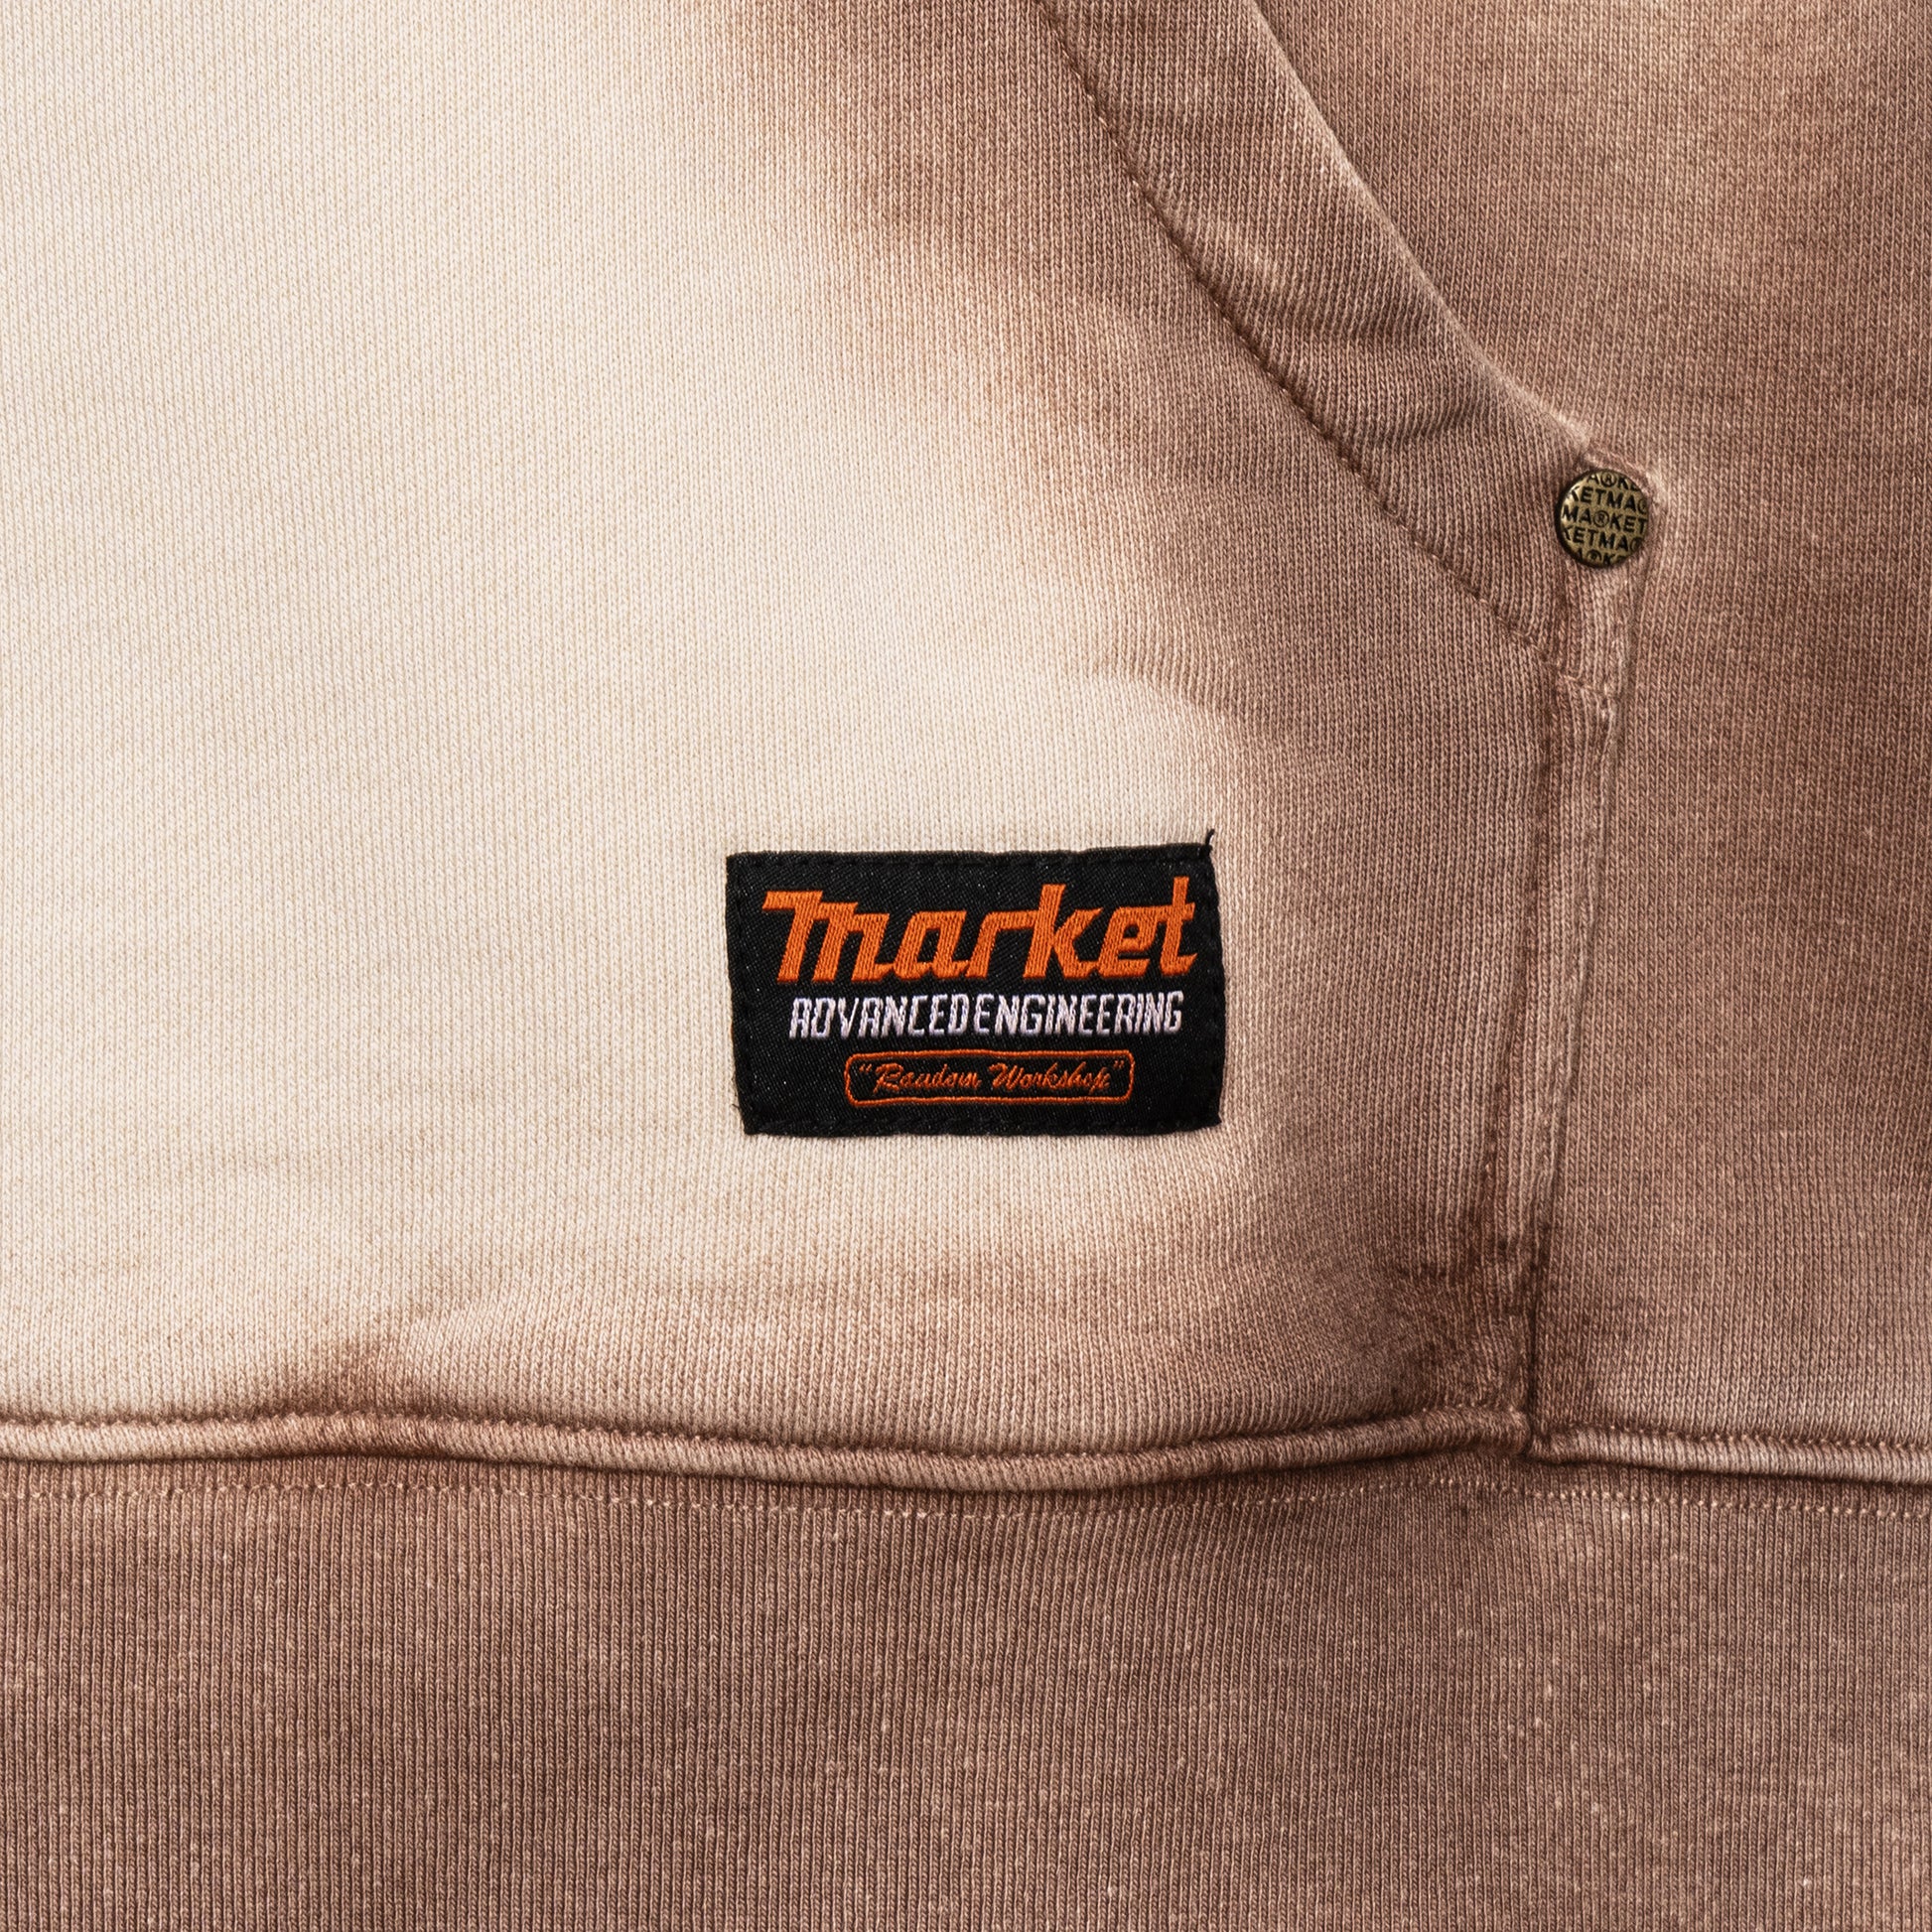 MARKET clothing brand MARGINS HOODIE. Find more graphic tees, hats and more at MarketStudios.com. Formally Chinatown Market.